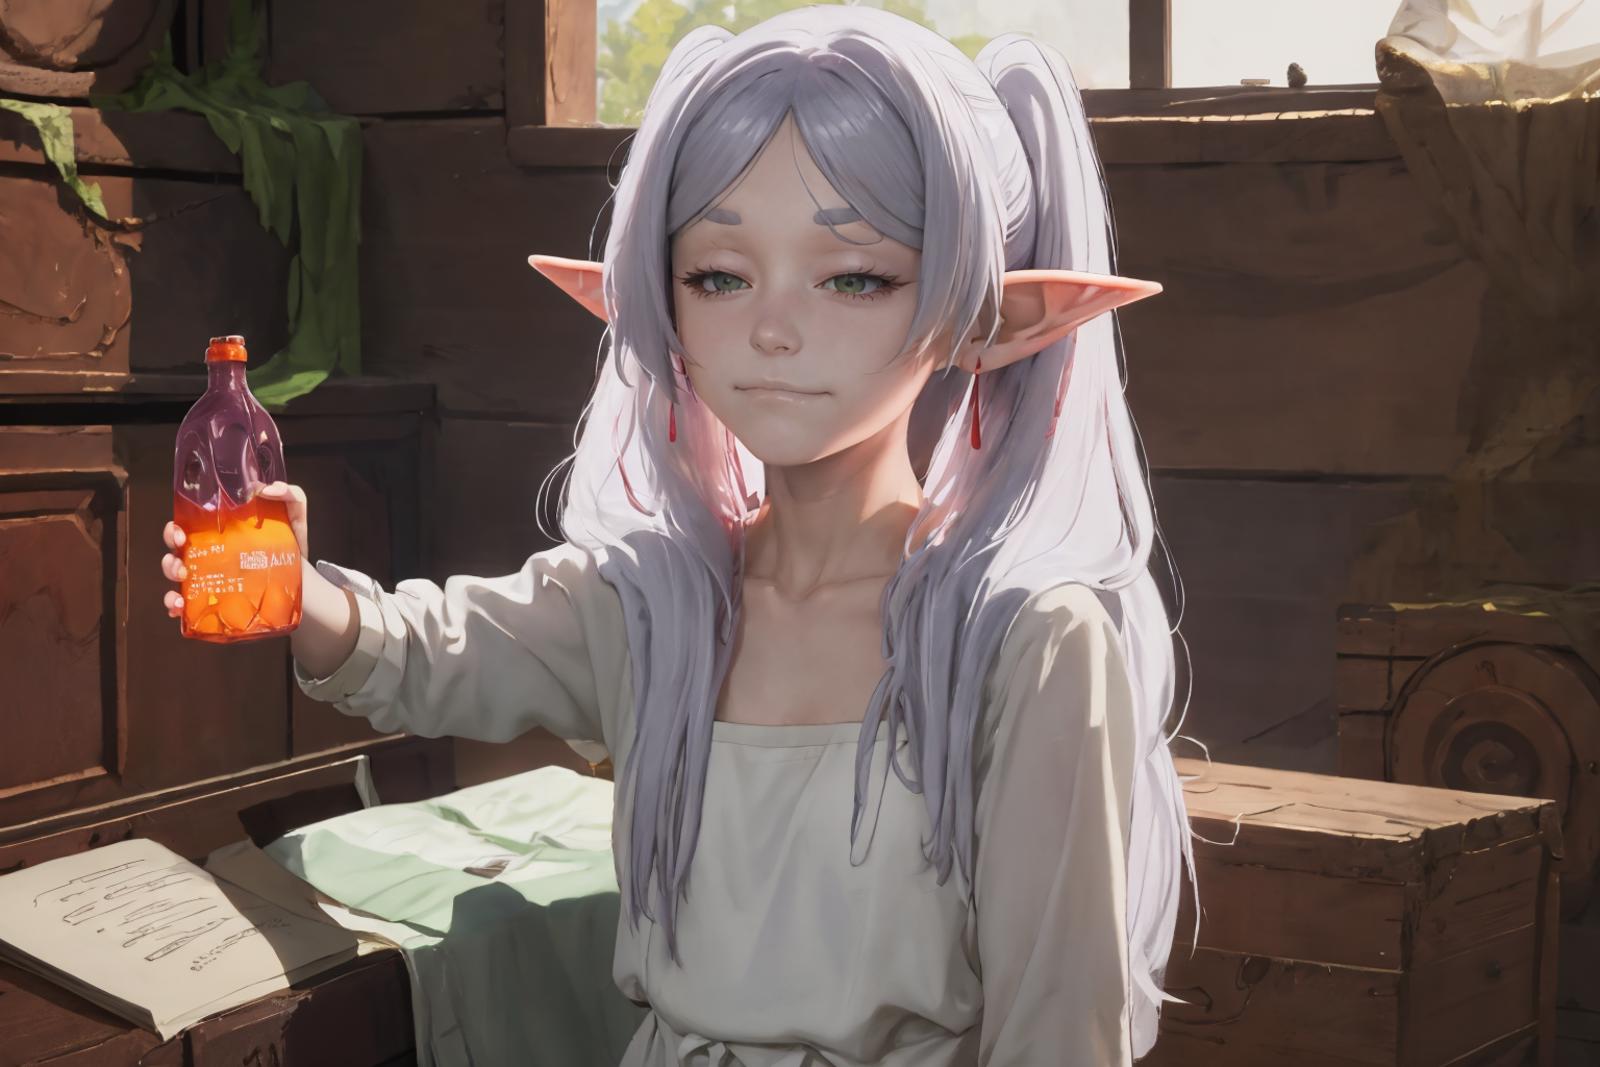 A young elf girl with purple hair holding a bottle.